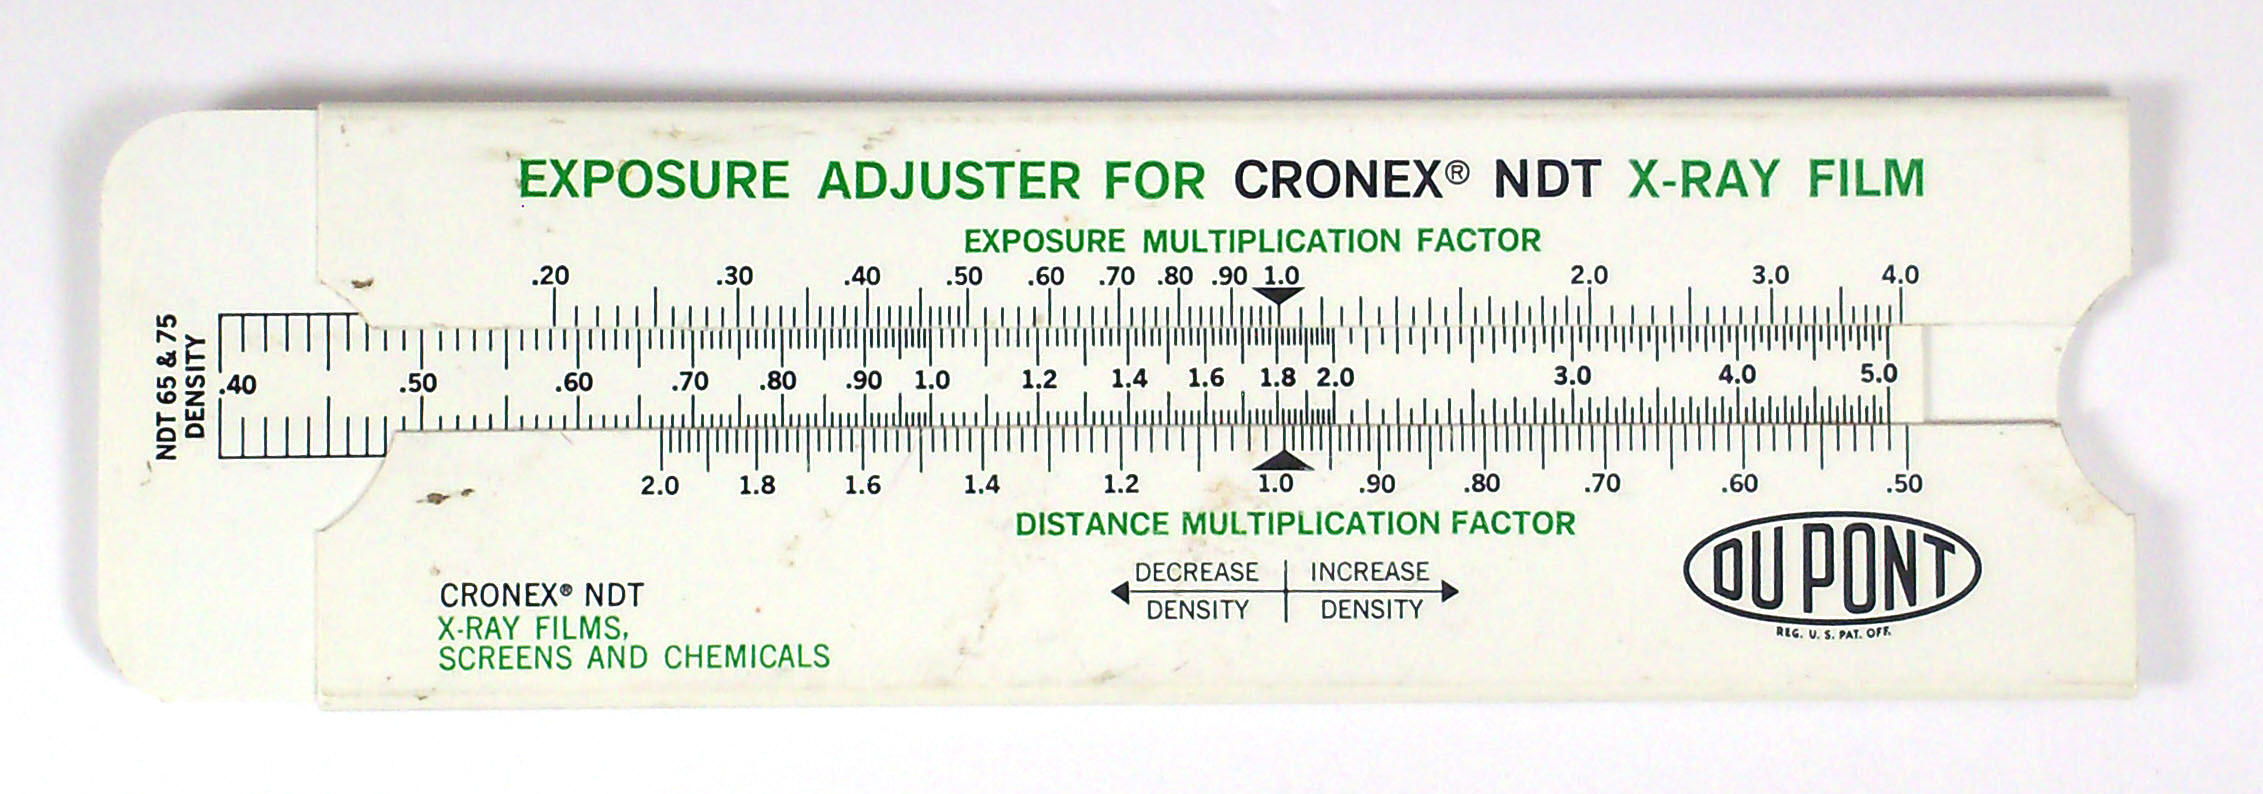 Exposure Adjuster for Chronex NDT X-Ray Film